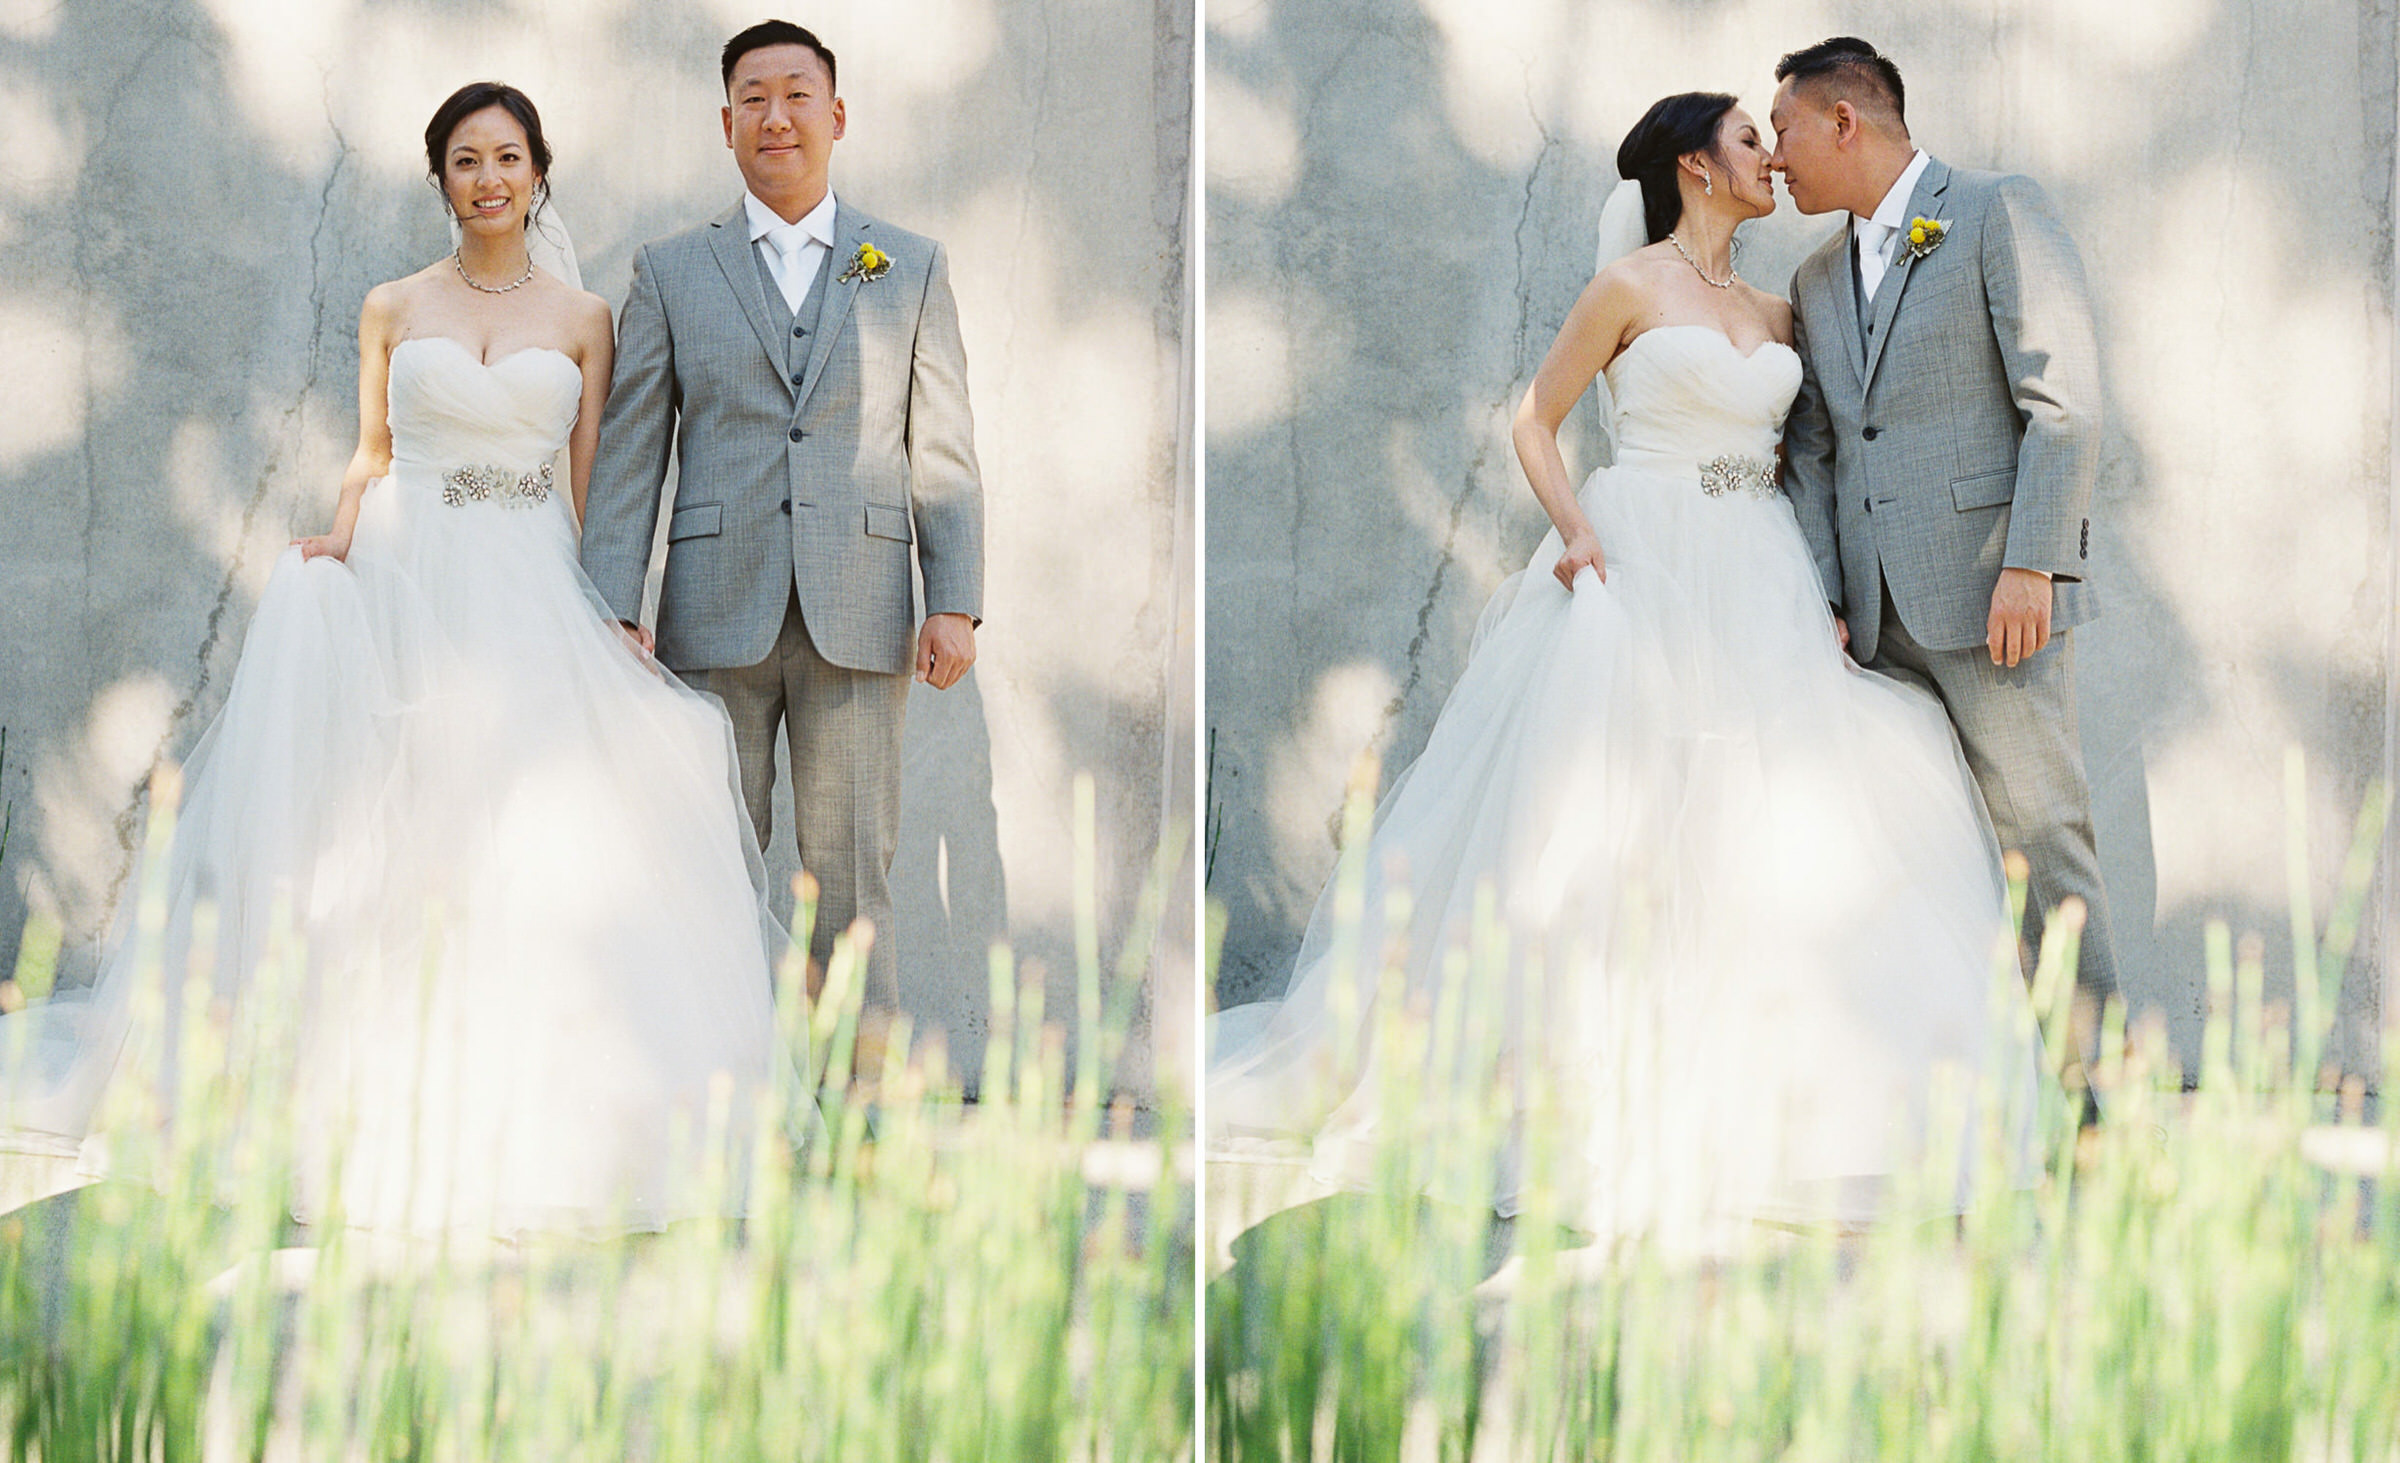 Cindy and Frank's wedding portraits at Novelty-Hill Januik